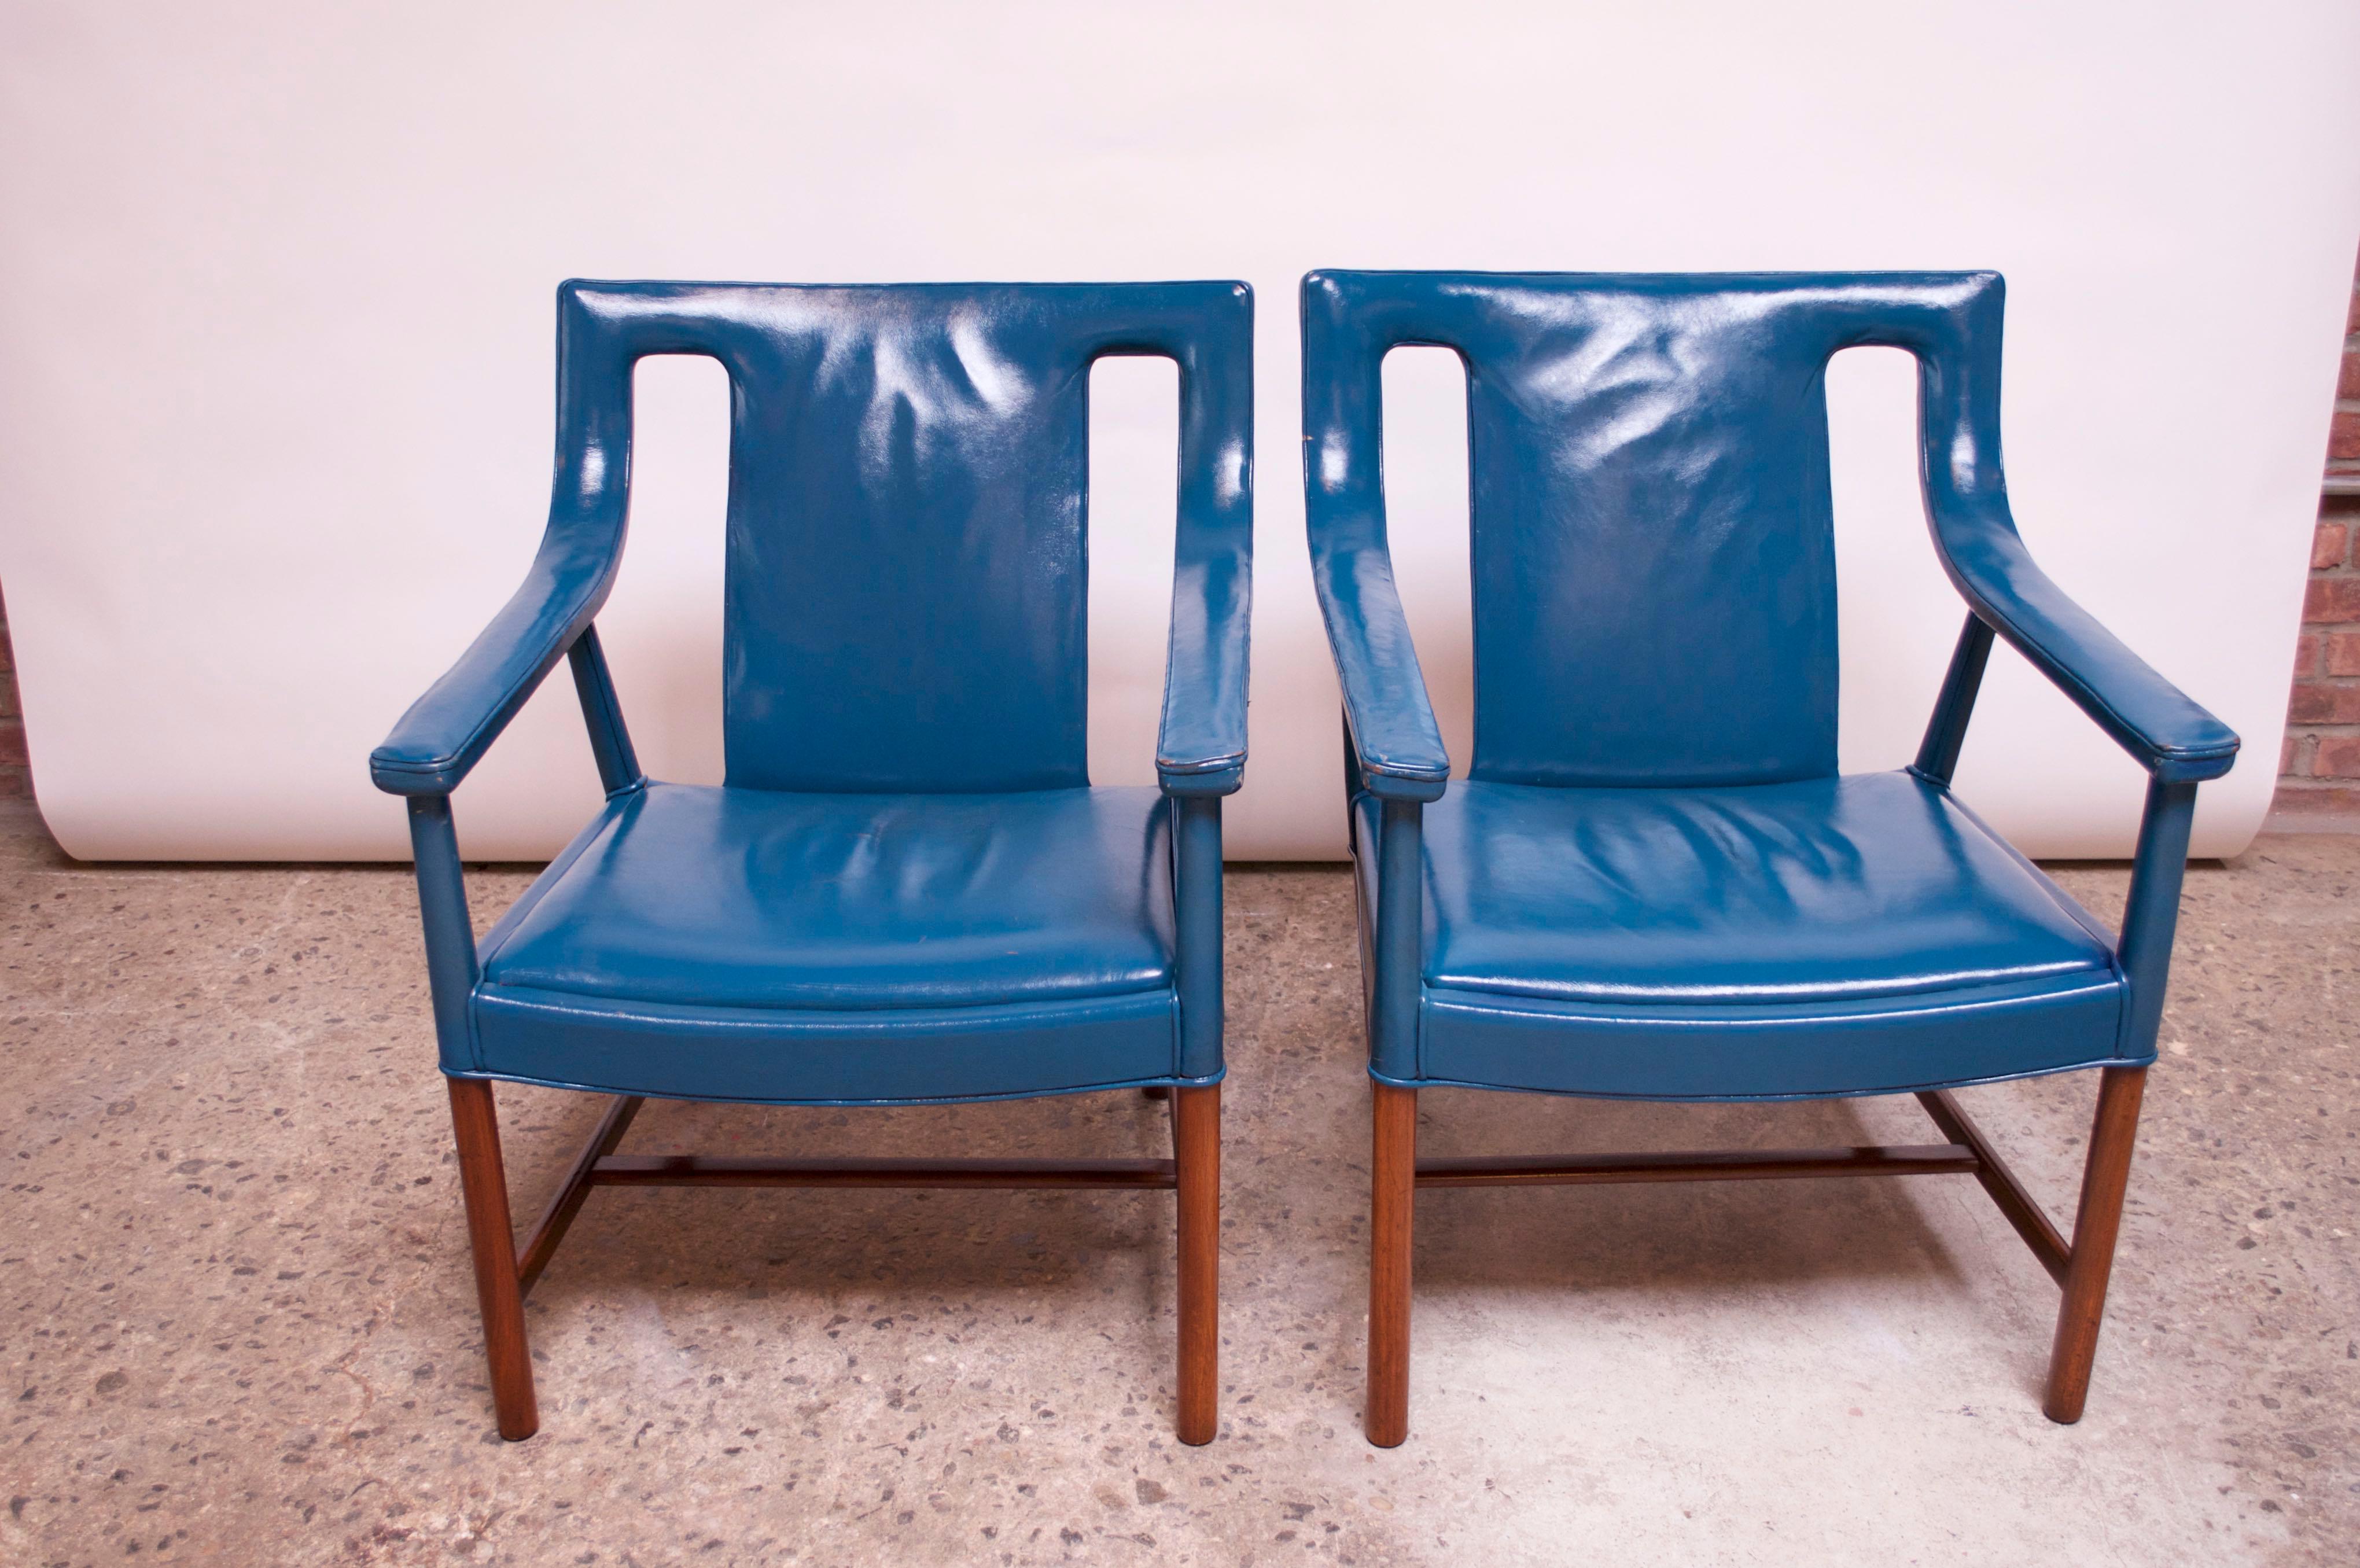 Pair of Danish Blue Leather Armchairs by Ejner Larsen and Aksel Bender Madsen 1